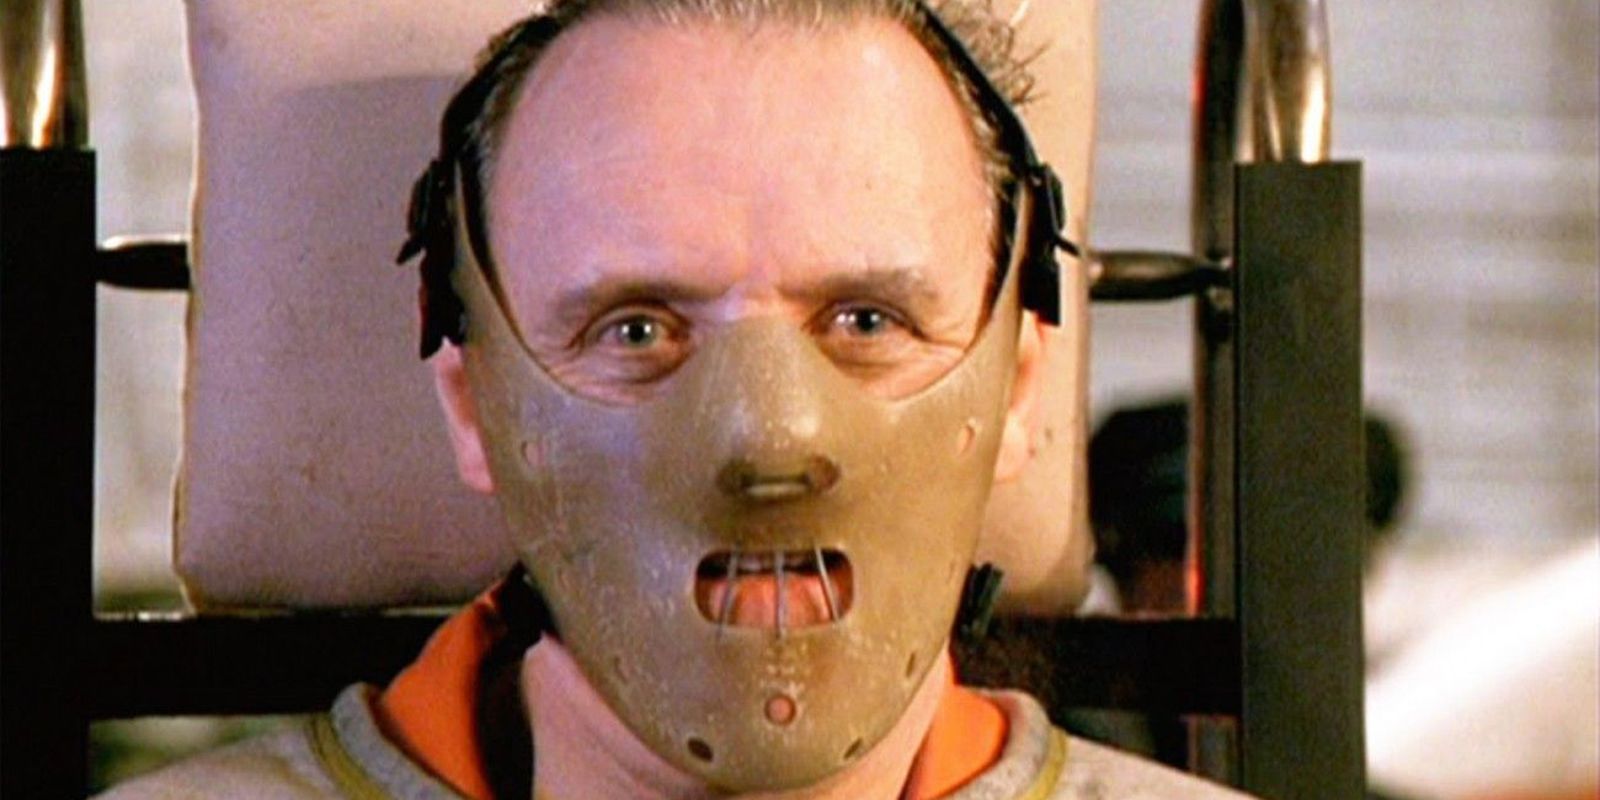 Hannibal Lecter in Silence of the Lambs wearing a bite mask and restraints